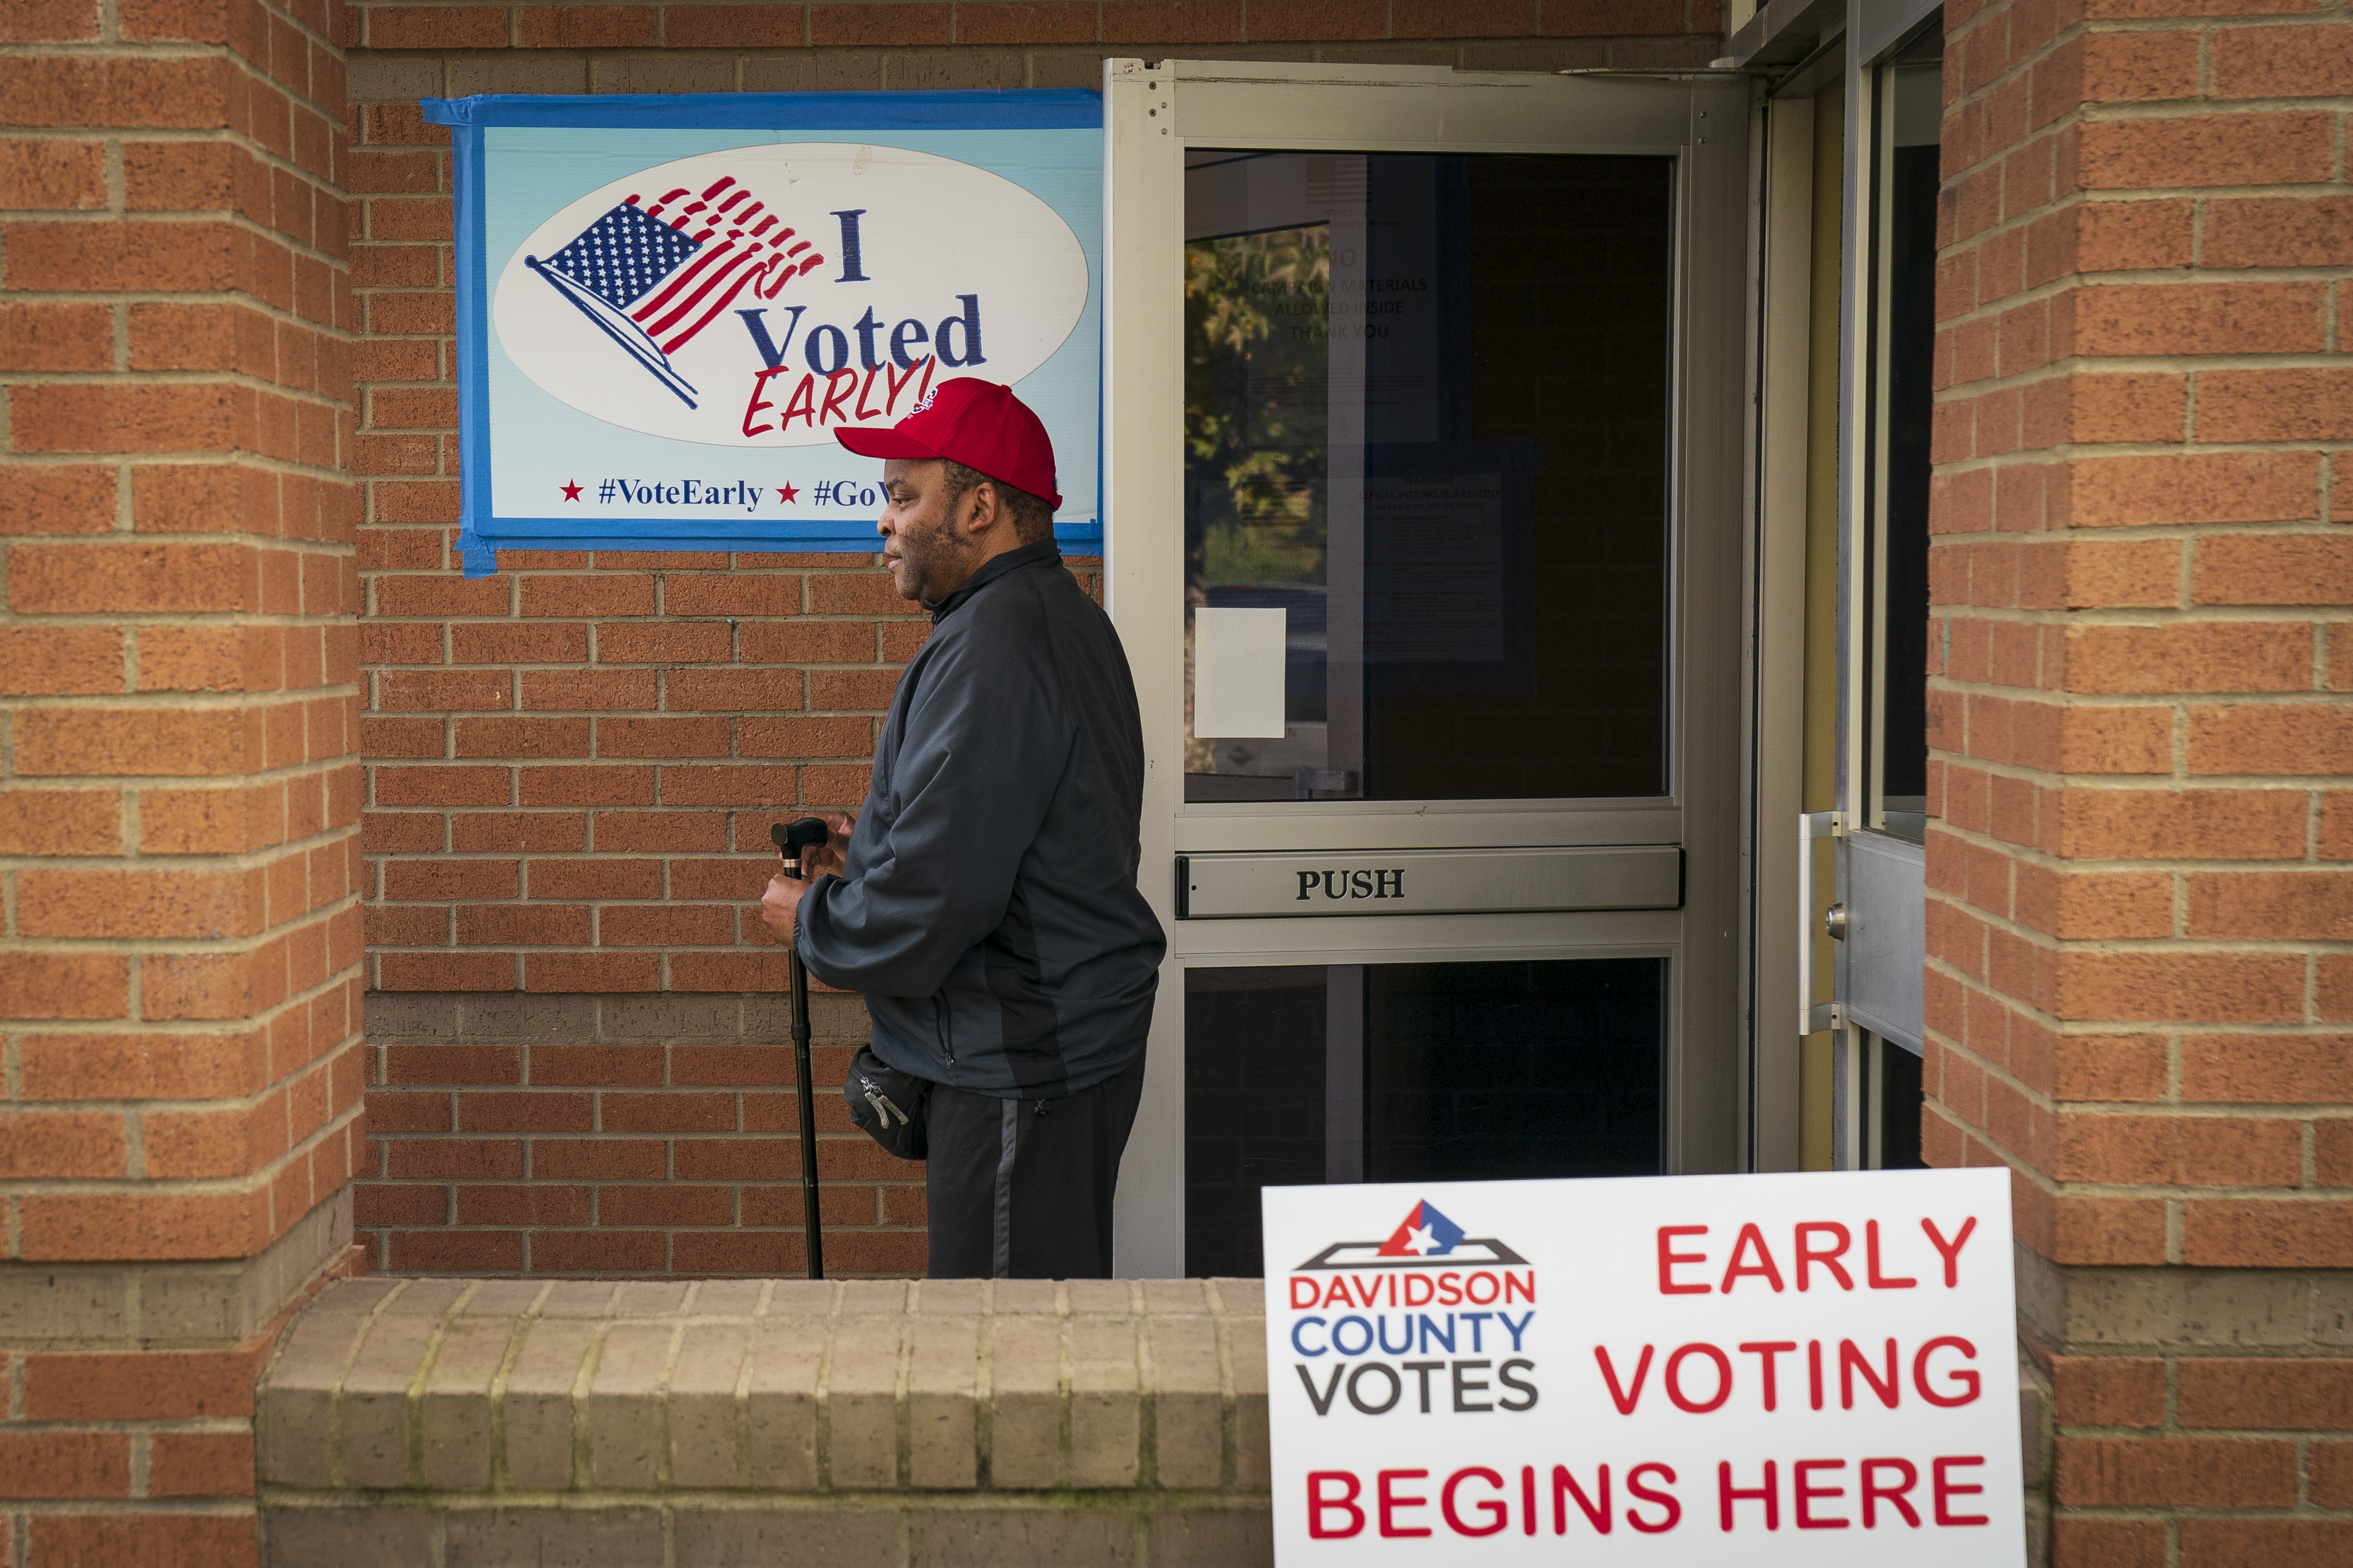 A voter exits a polling place during early voting at the Bordeaux Branch of the Nashville Public Library on Tuesday.